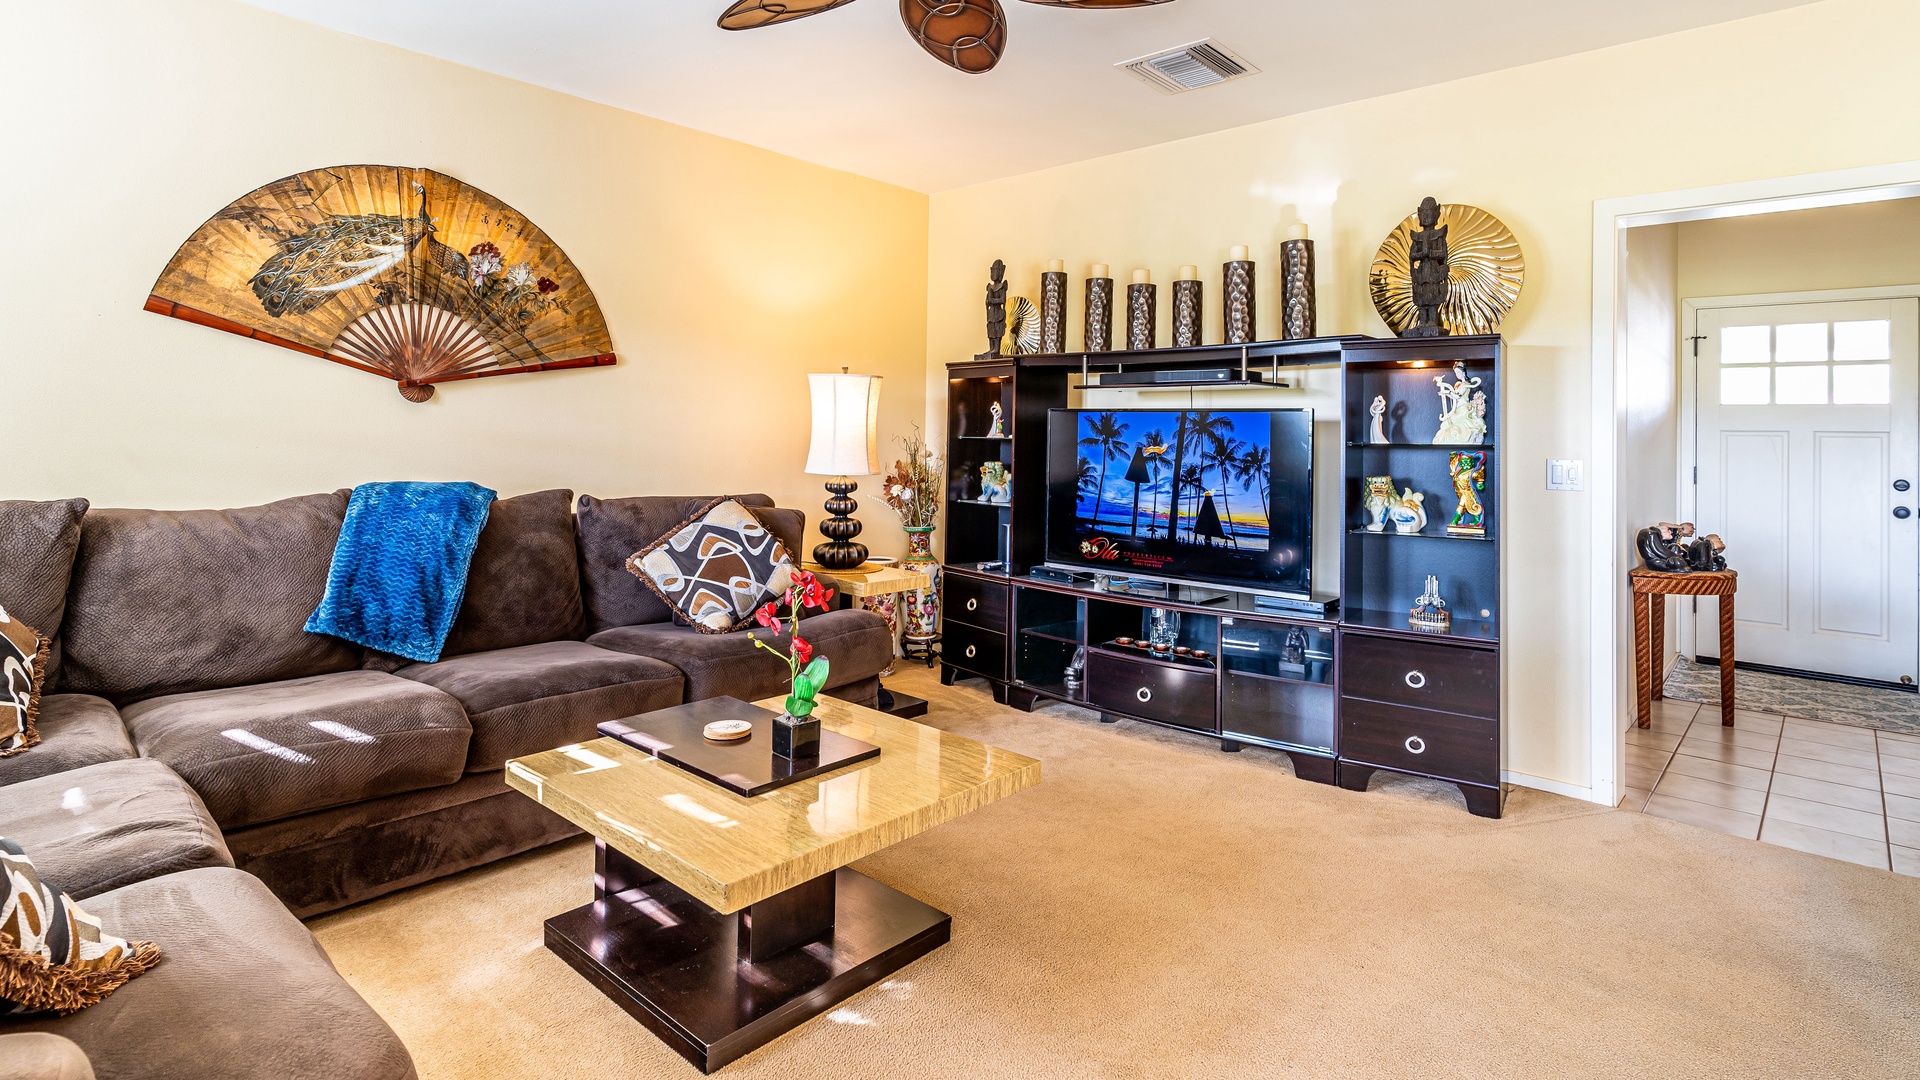 Kapolei Vacation Rentals, Coconut Plantation 1086-4 - Curl up with a book or for movie night in your home away from home.